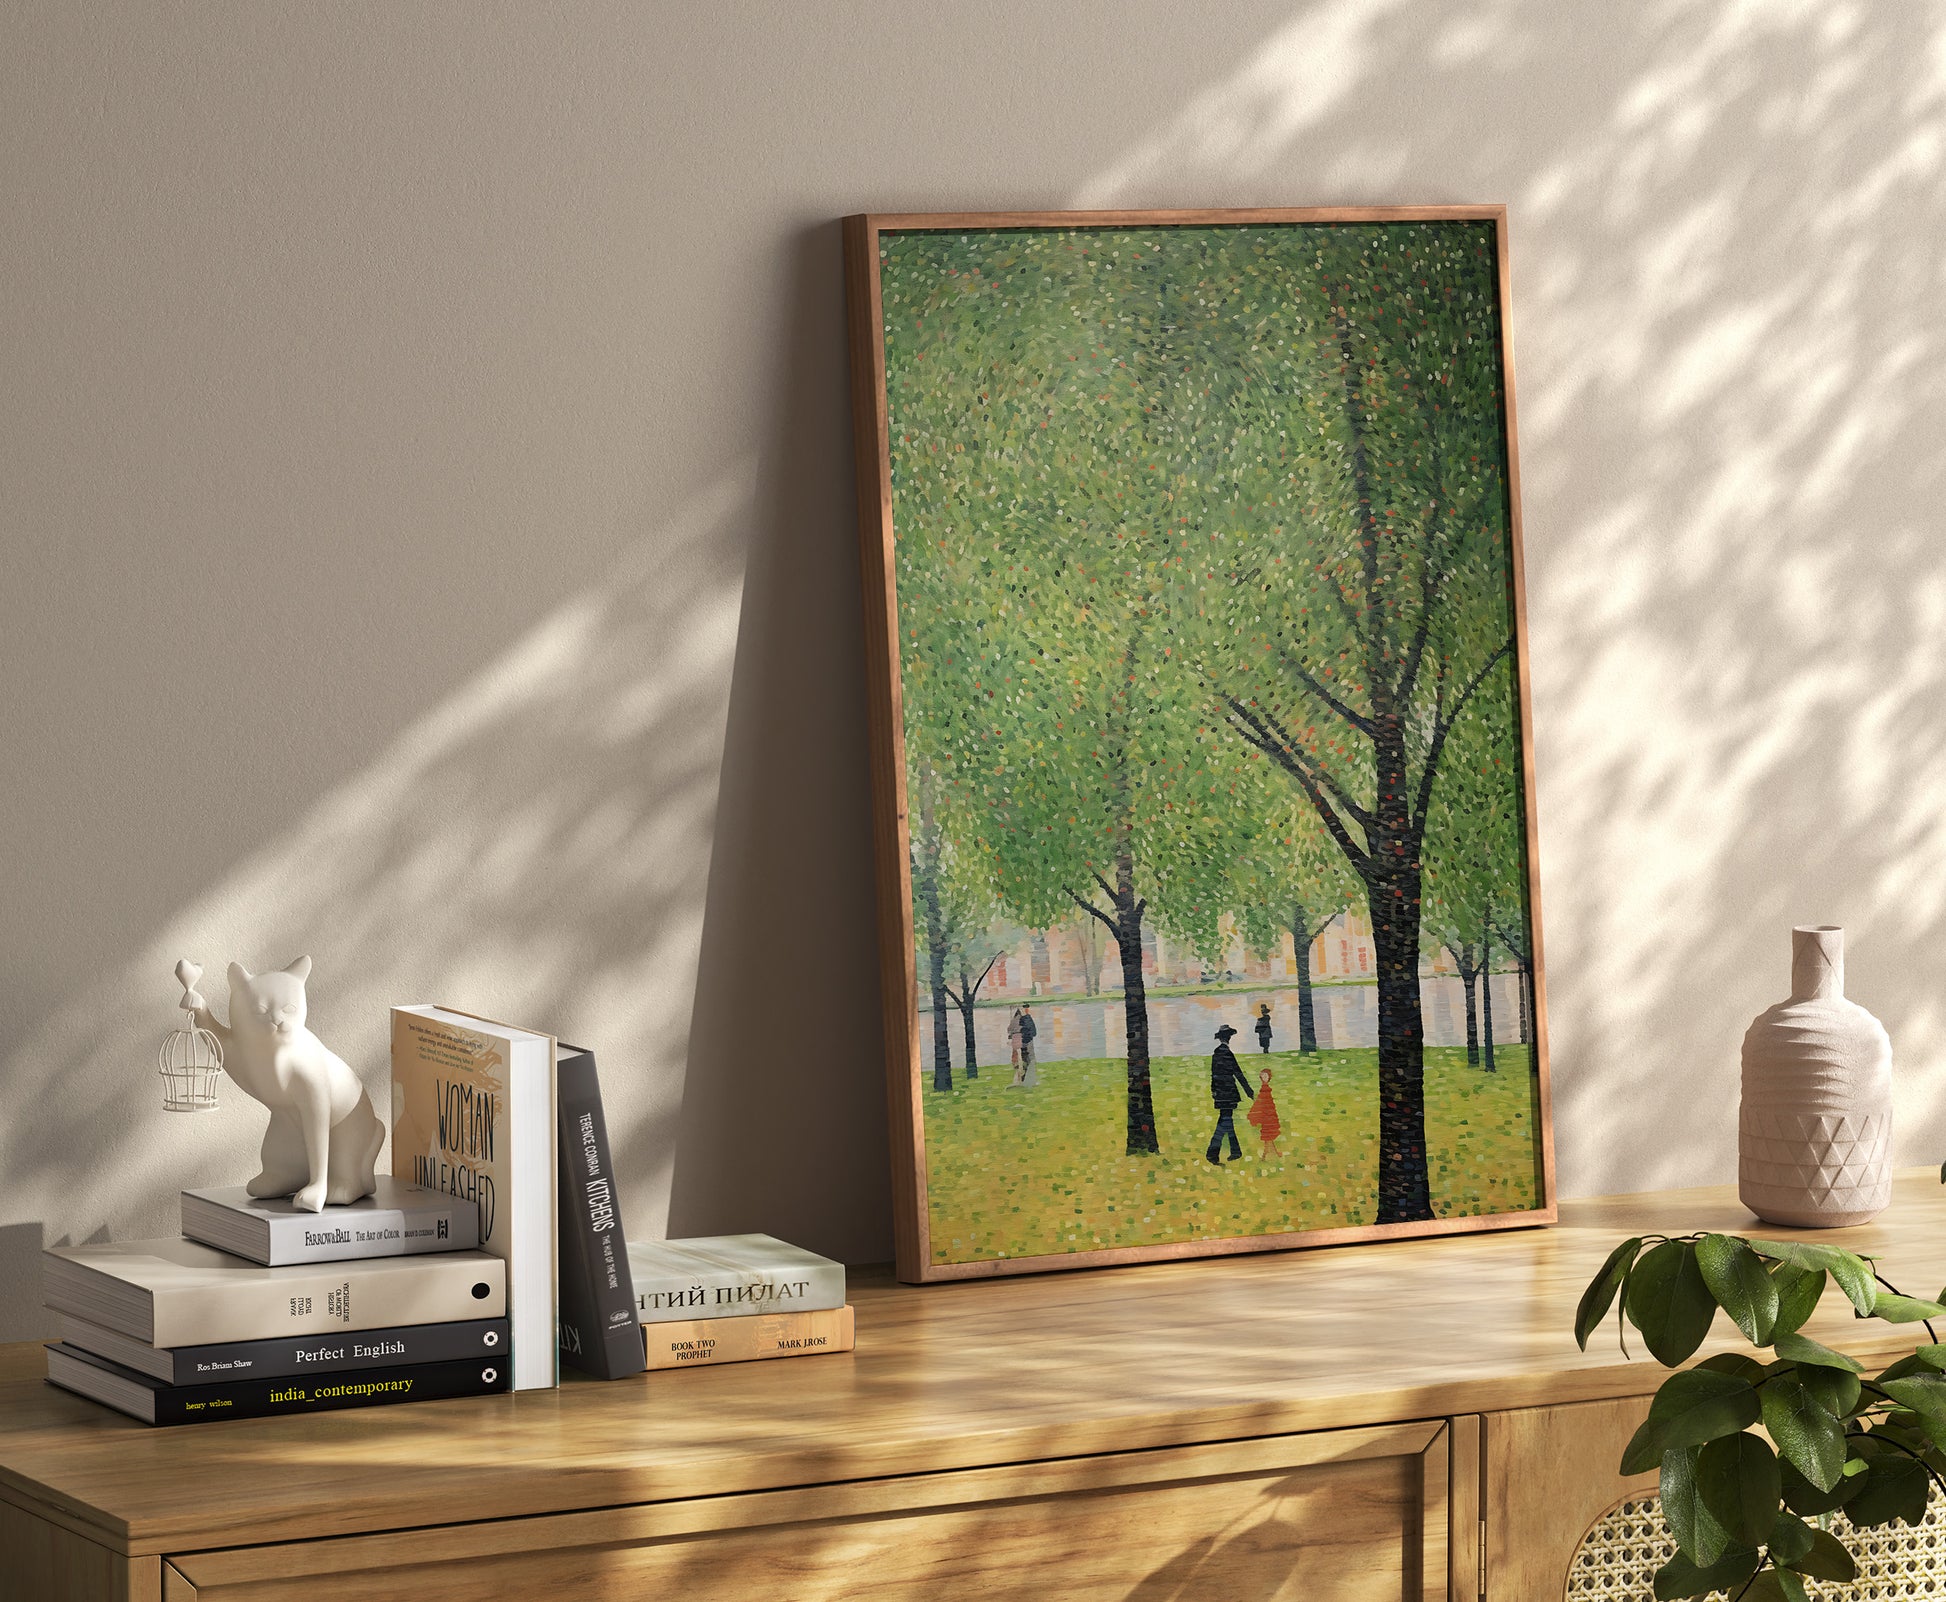 A framed painting of a park scene placed on a floor leaning against a wall, with books and decor items nearby.